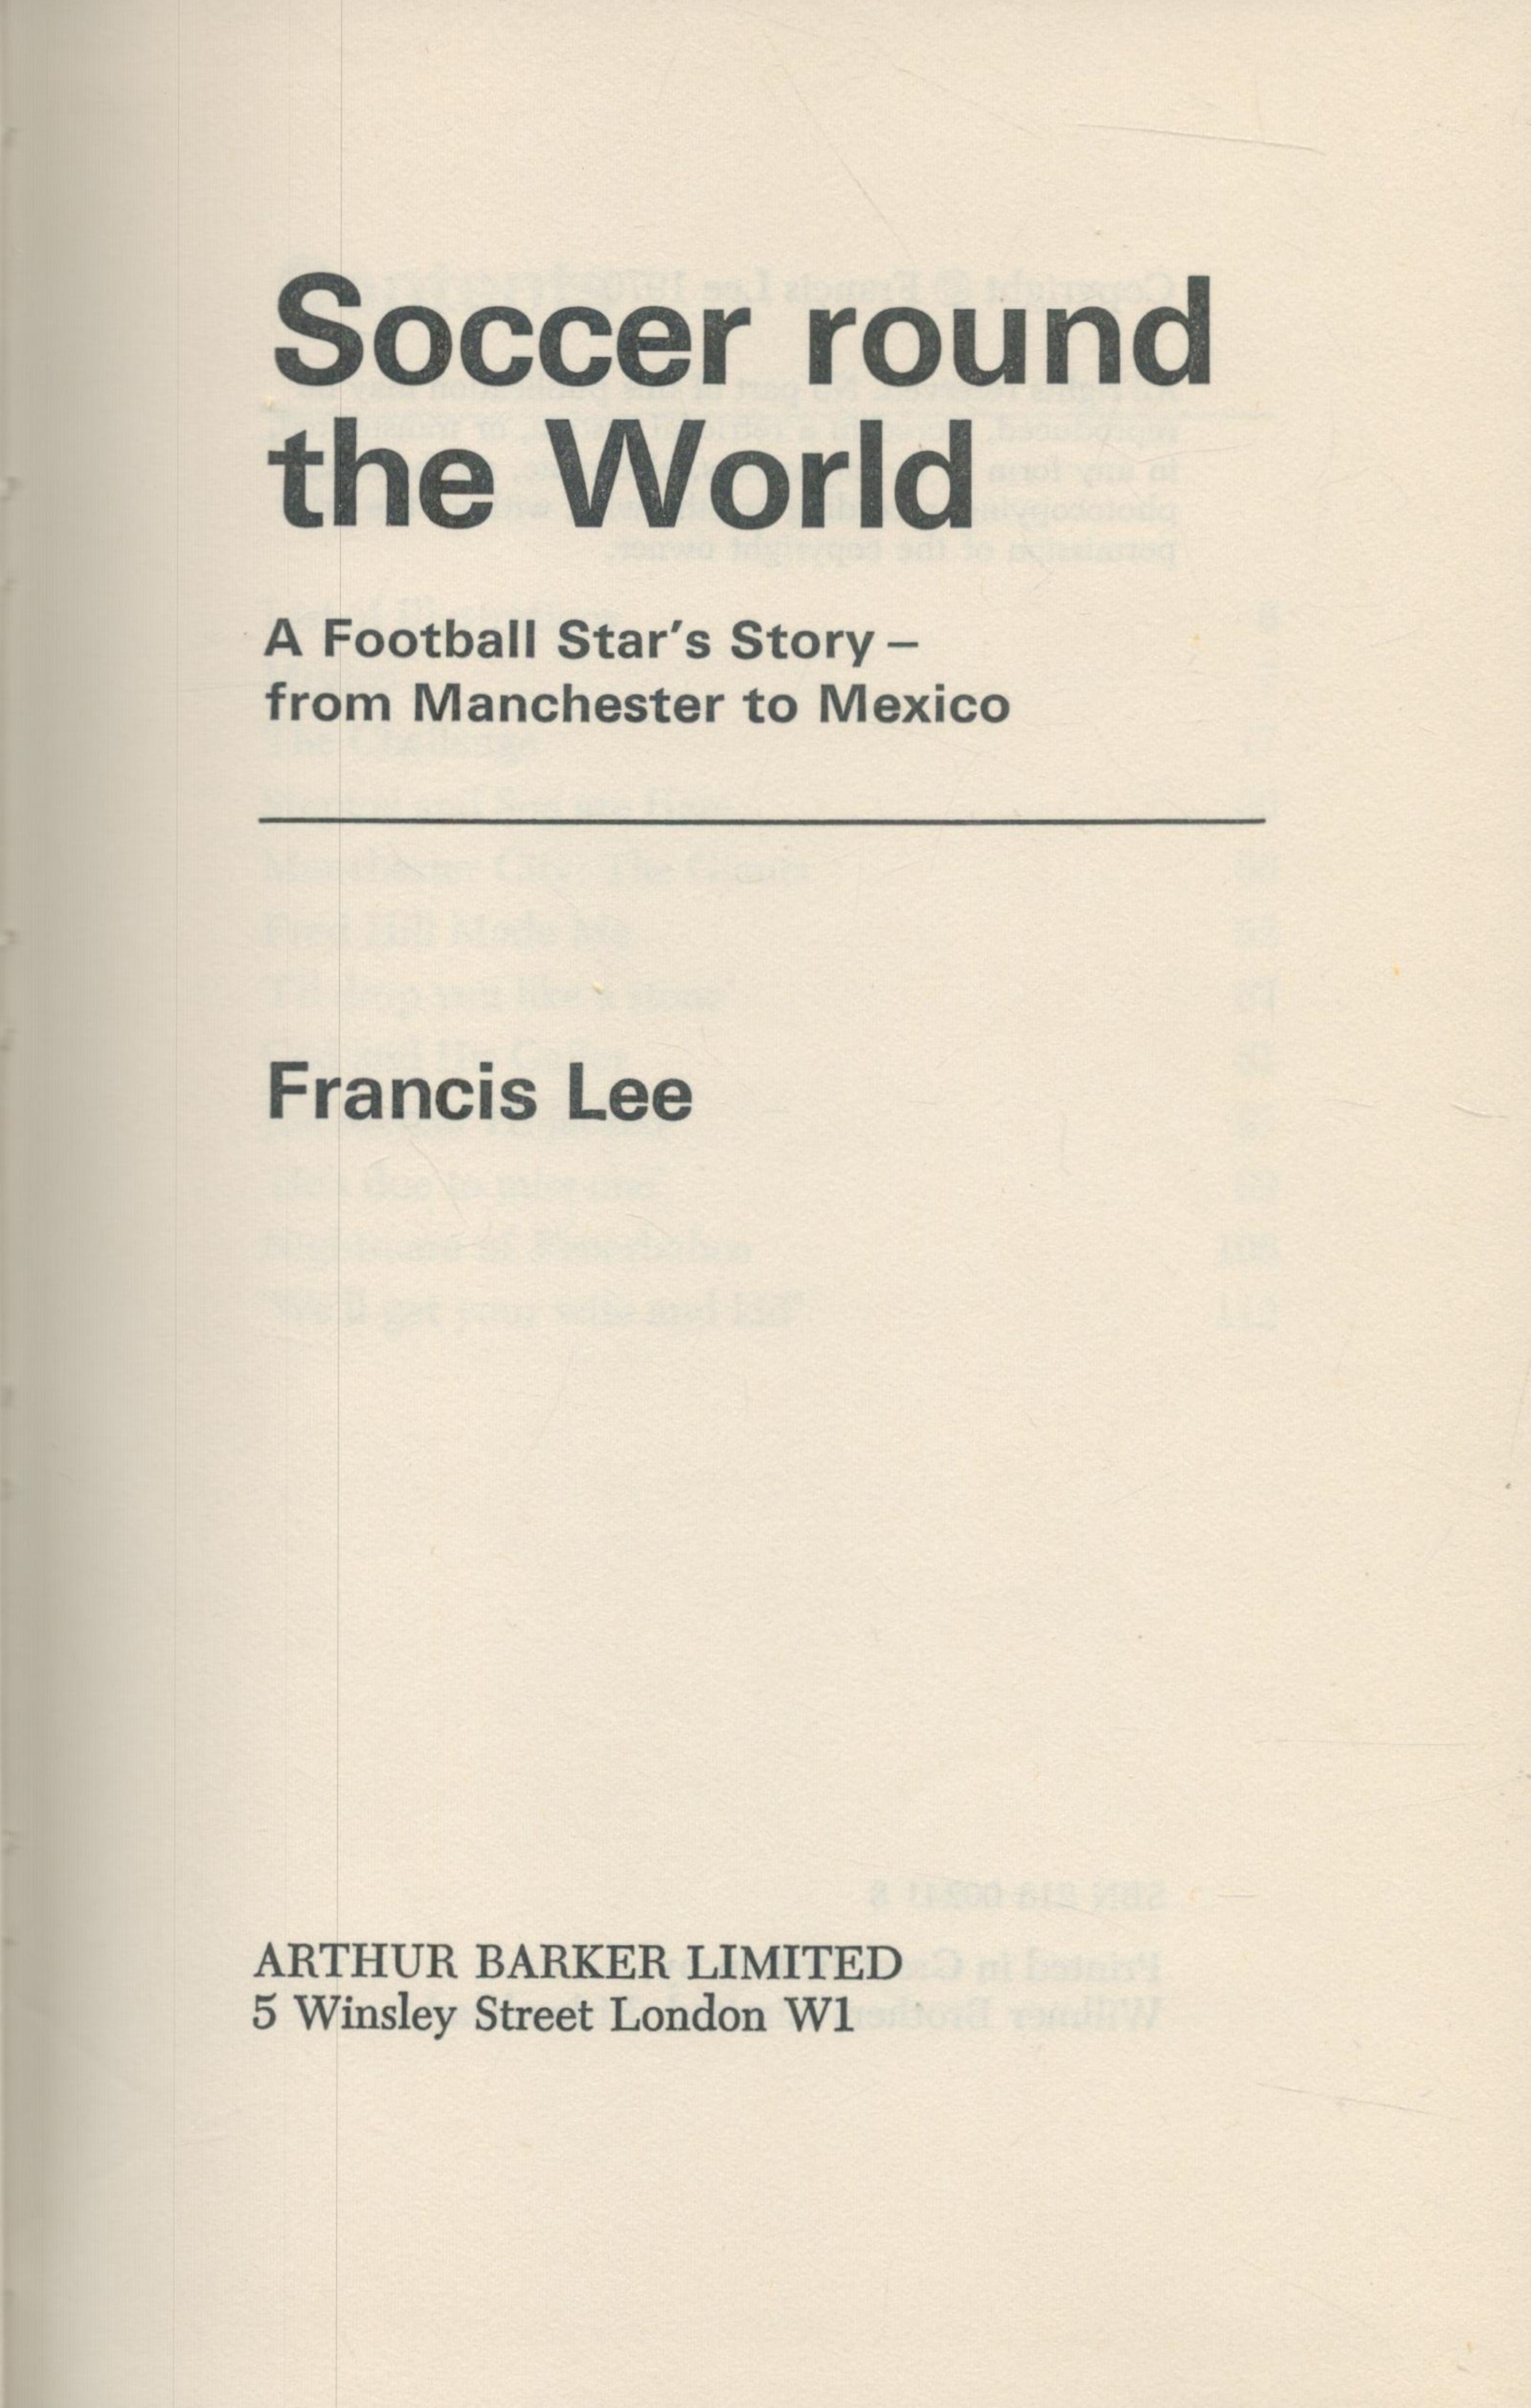 Soccer round the world by Francis Lee hardback book. UNSIGNED. Good Condition. All autographs come - Image 2 of 3